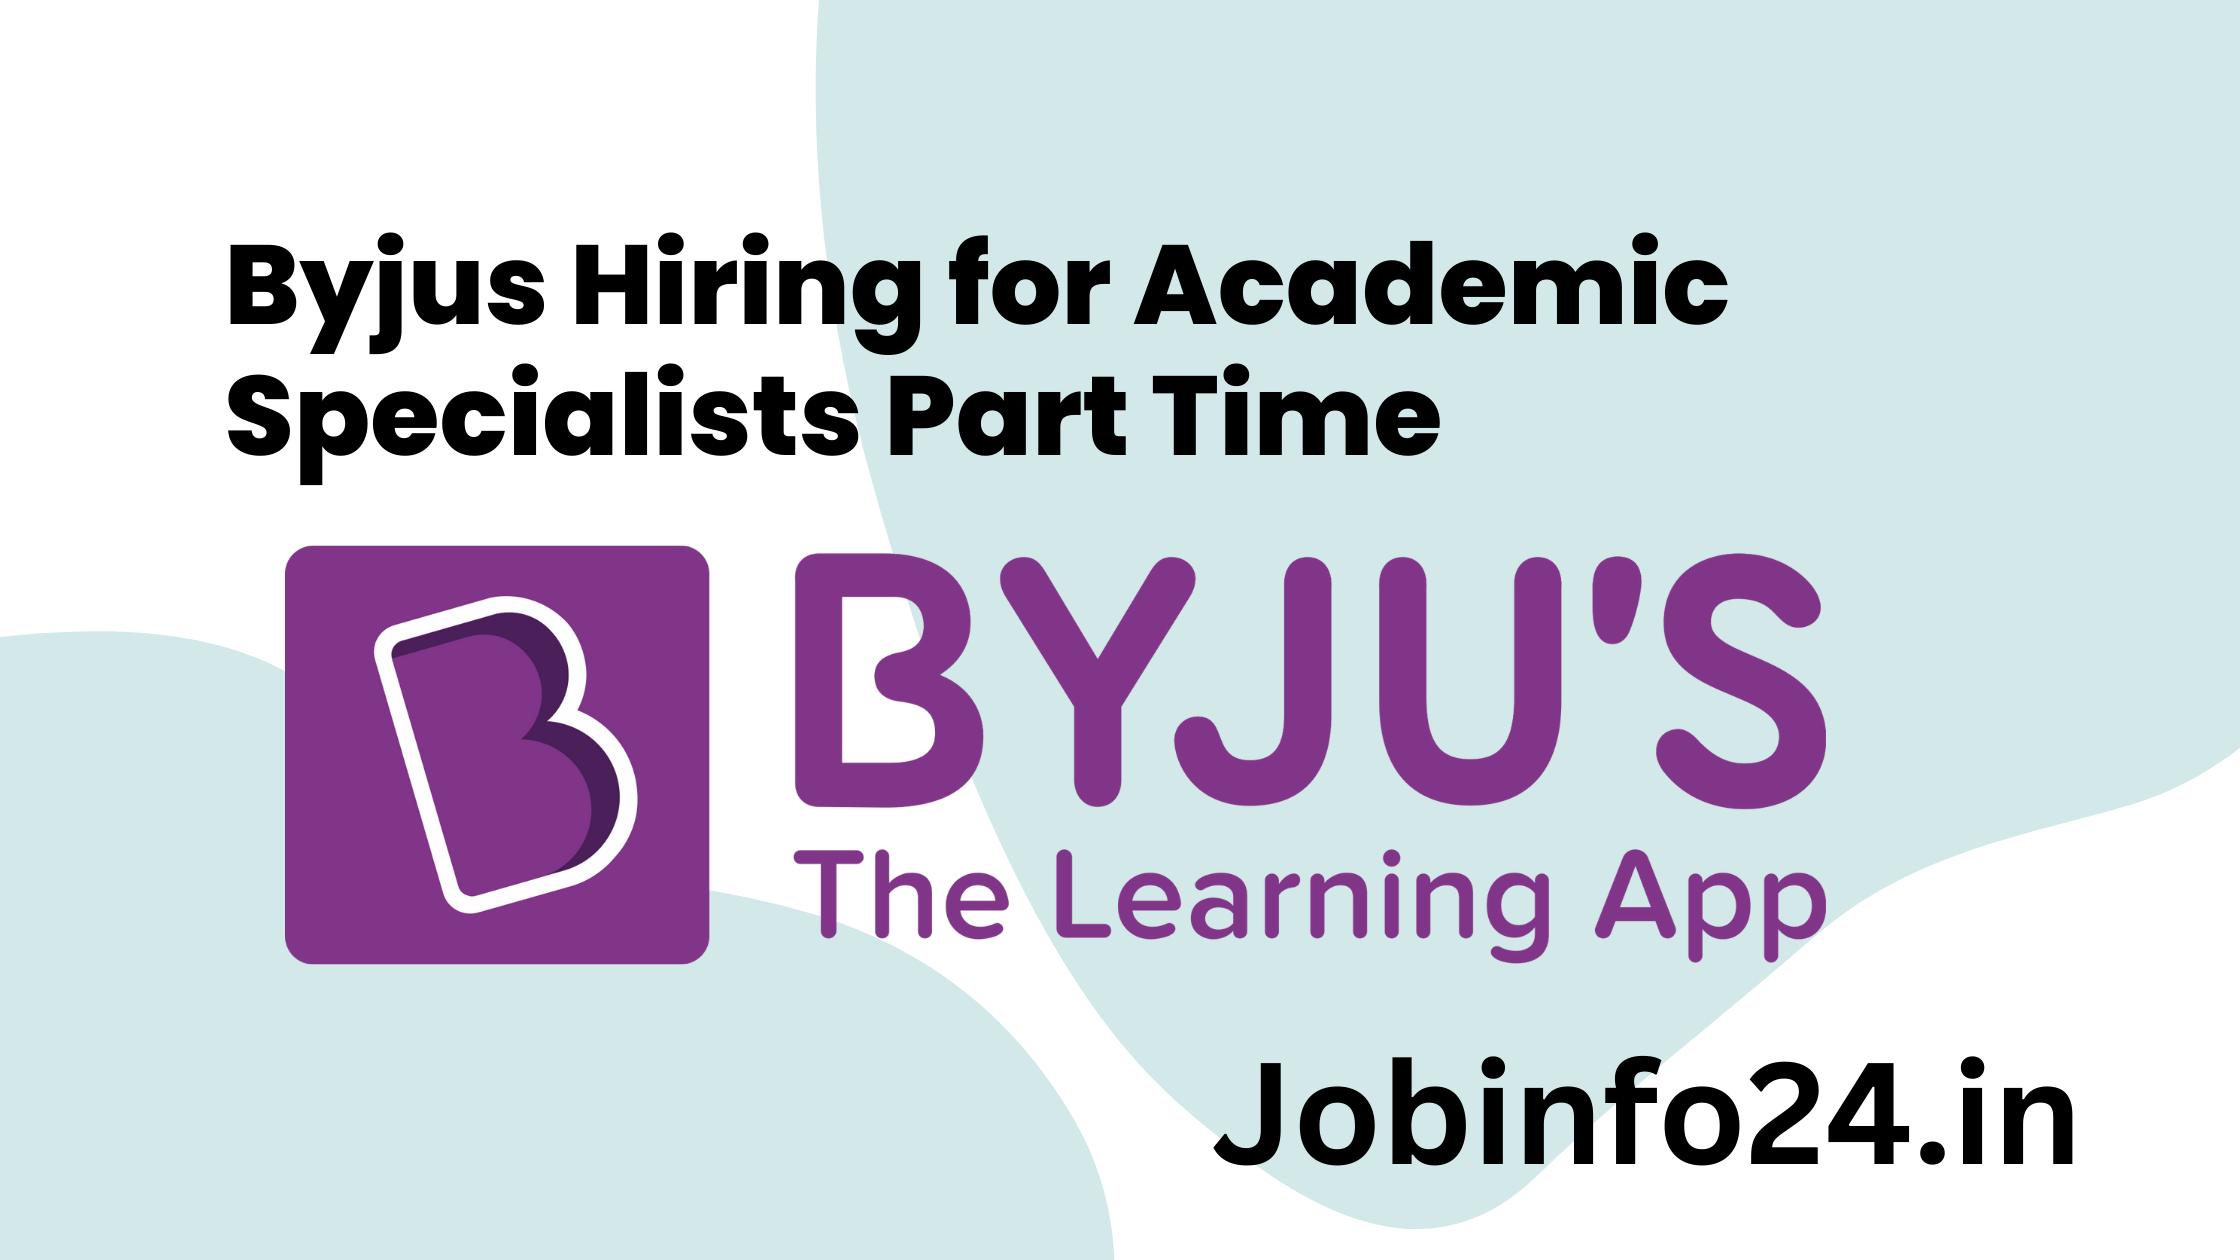 Byjus Hiring for Academic Specialists Part Time